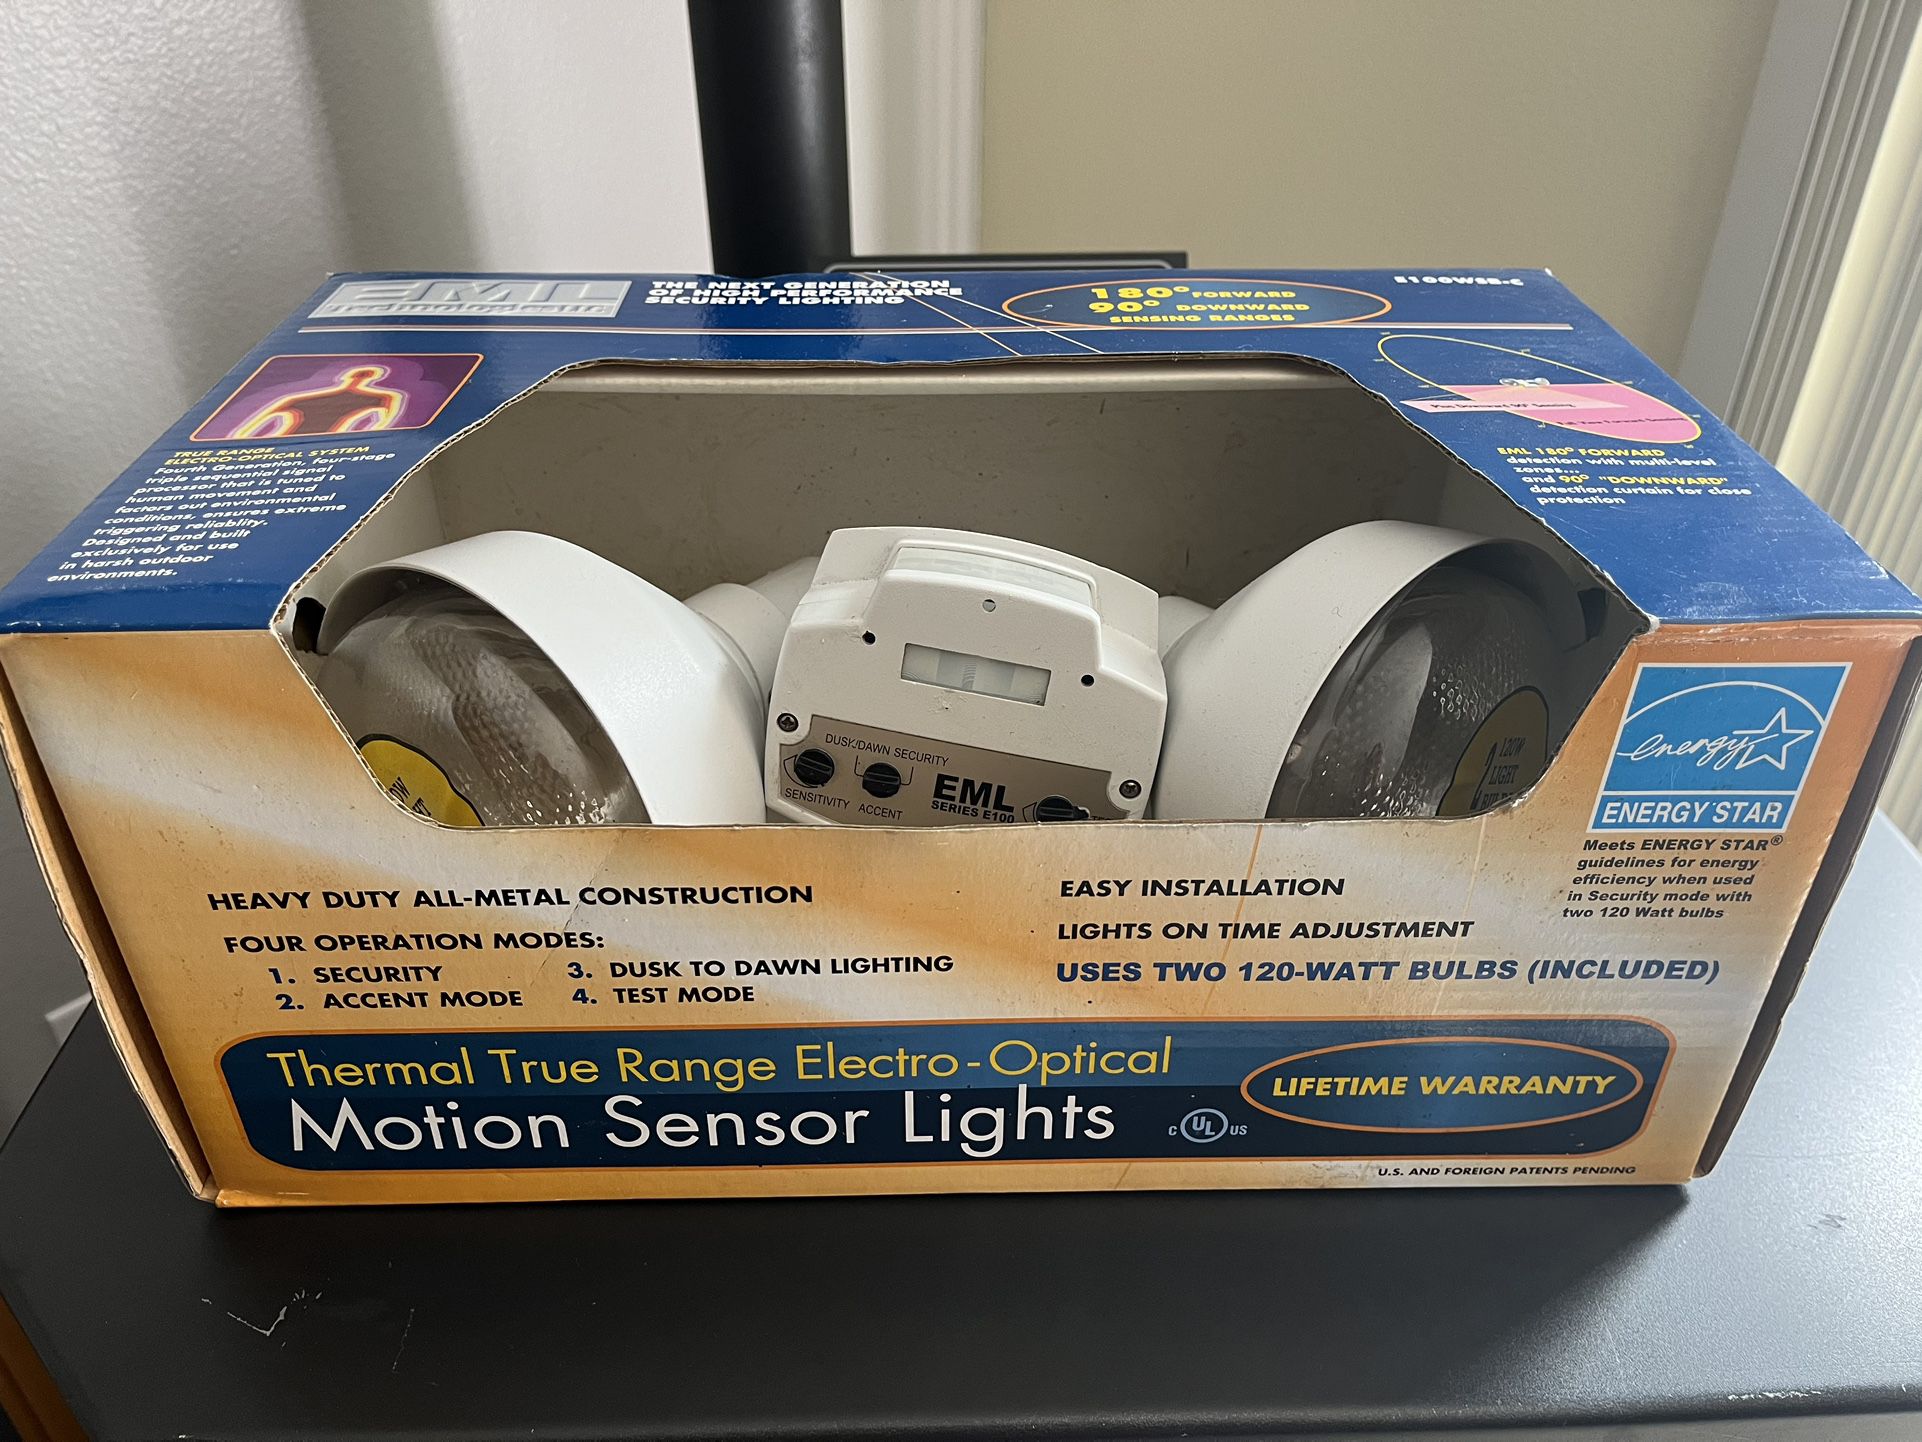 High Performance Security Lighting - New In Box 